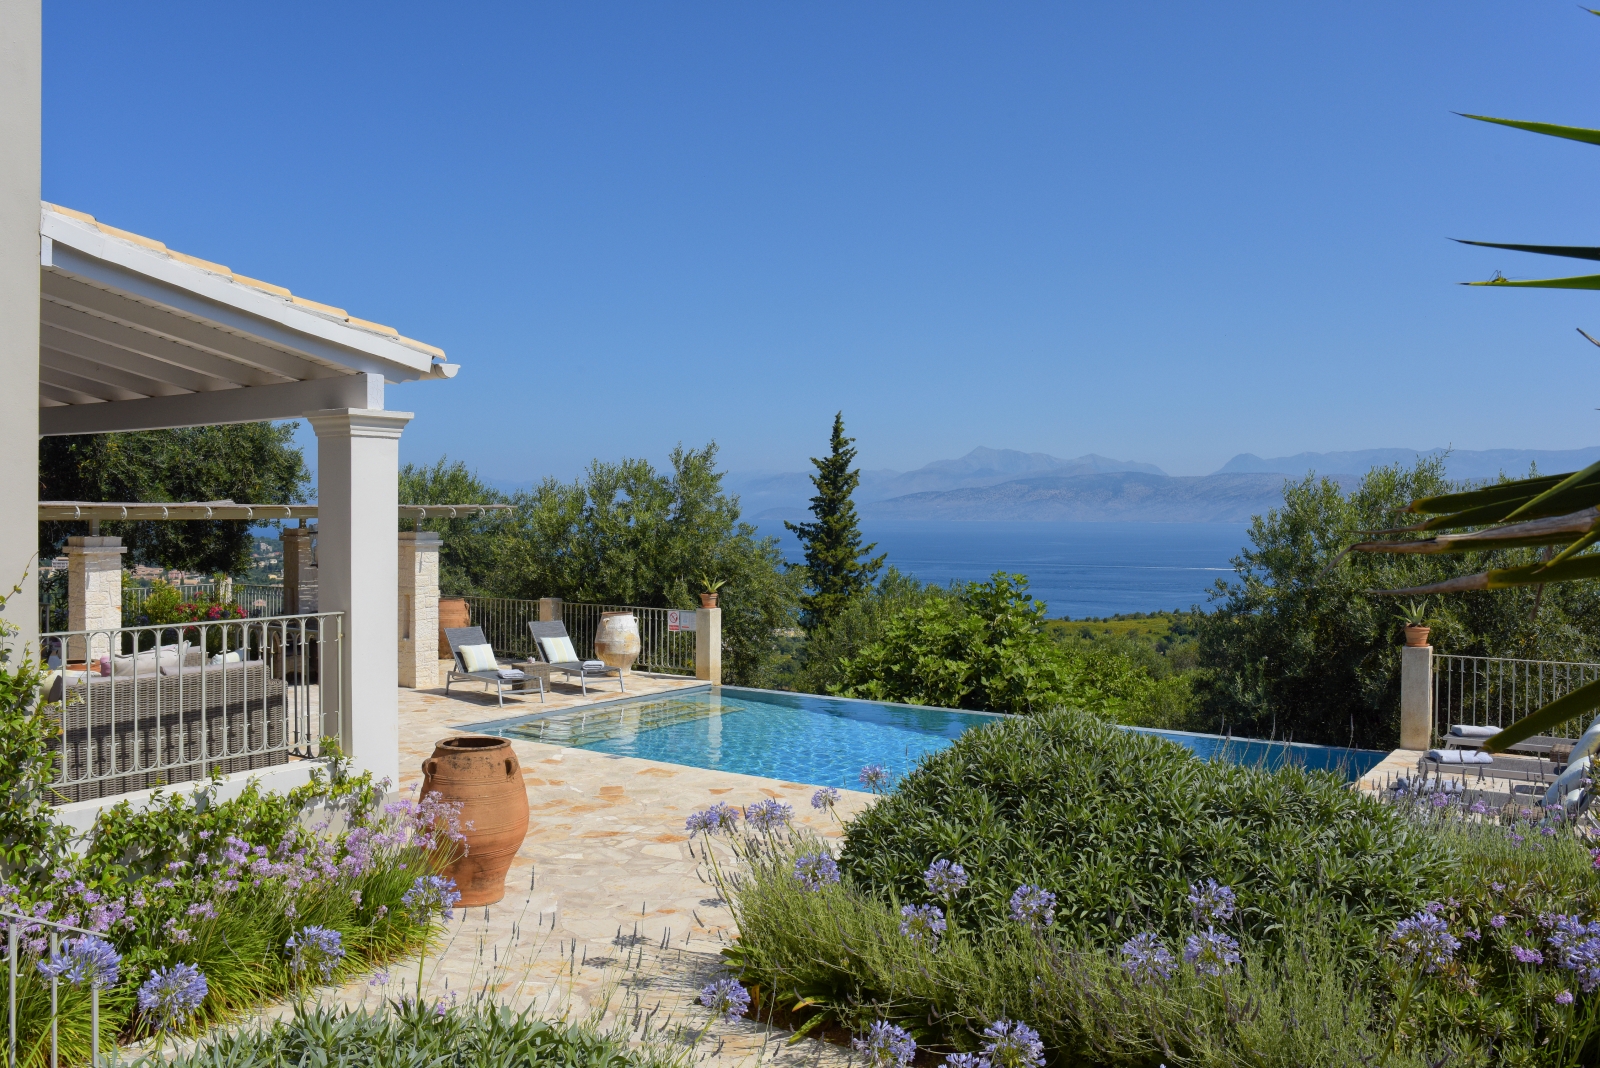 Pool area with purple flowers, terracotta pot, sun loungers and sea view at Eremitis on Corfu, Greece 